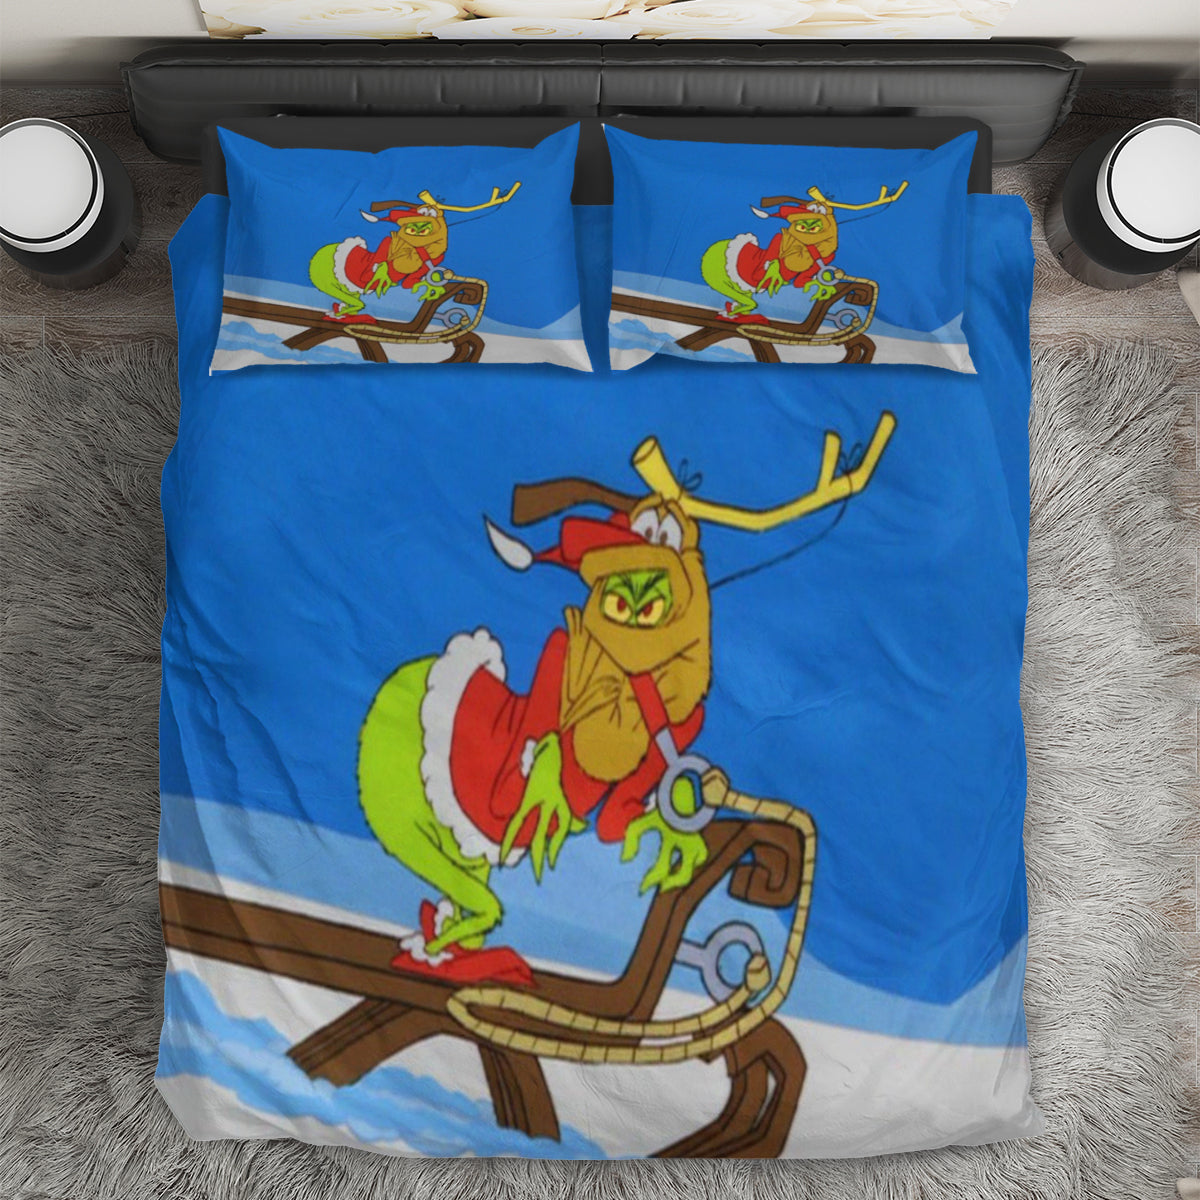 The Grinch Christmas Grinch Max 11 3PCS Bedding Set Duvet Cover And Pillow Cases Gift For Fan